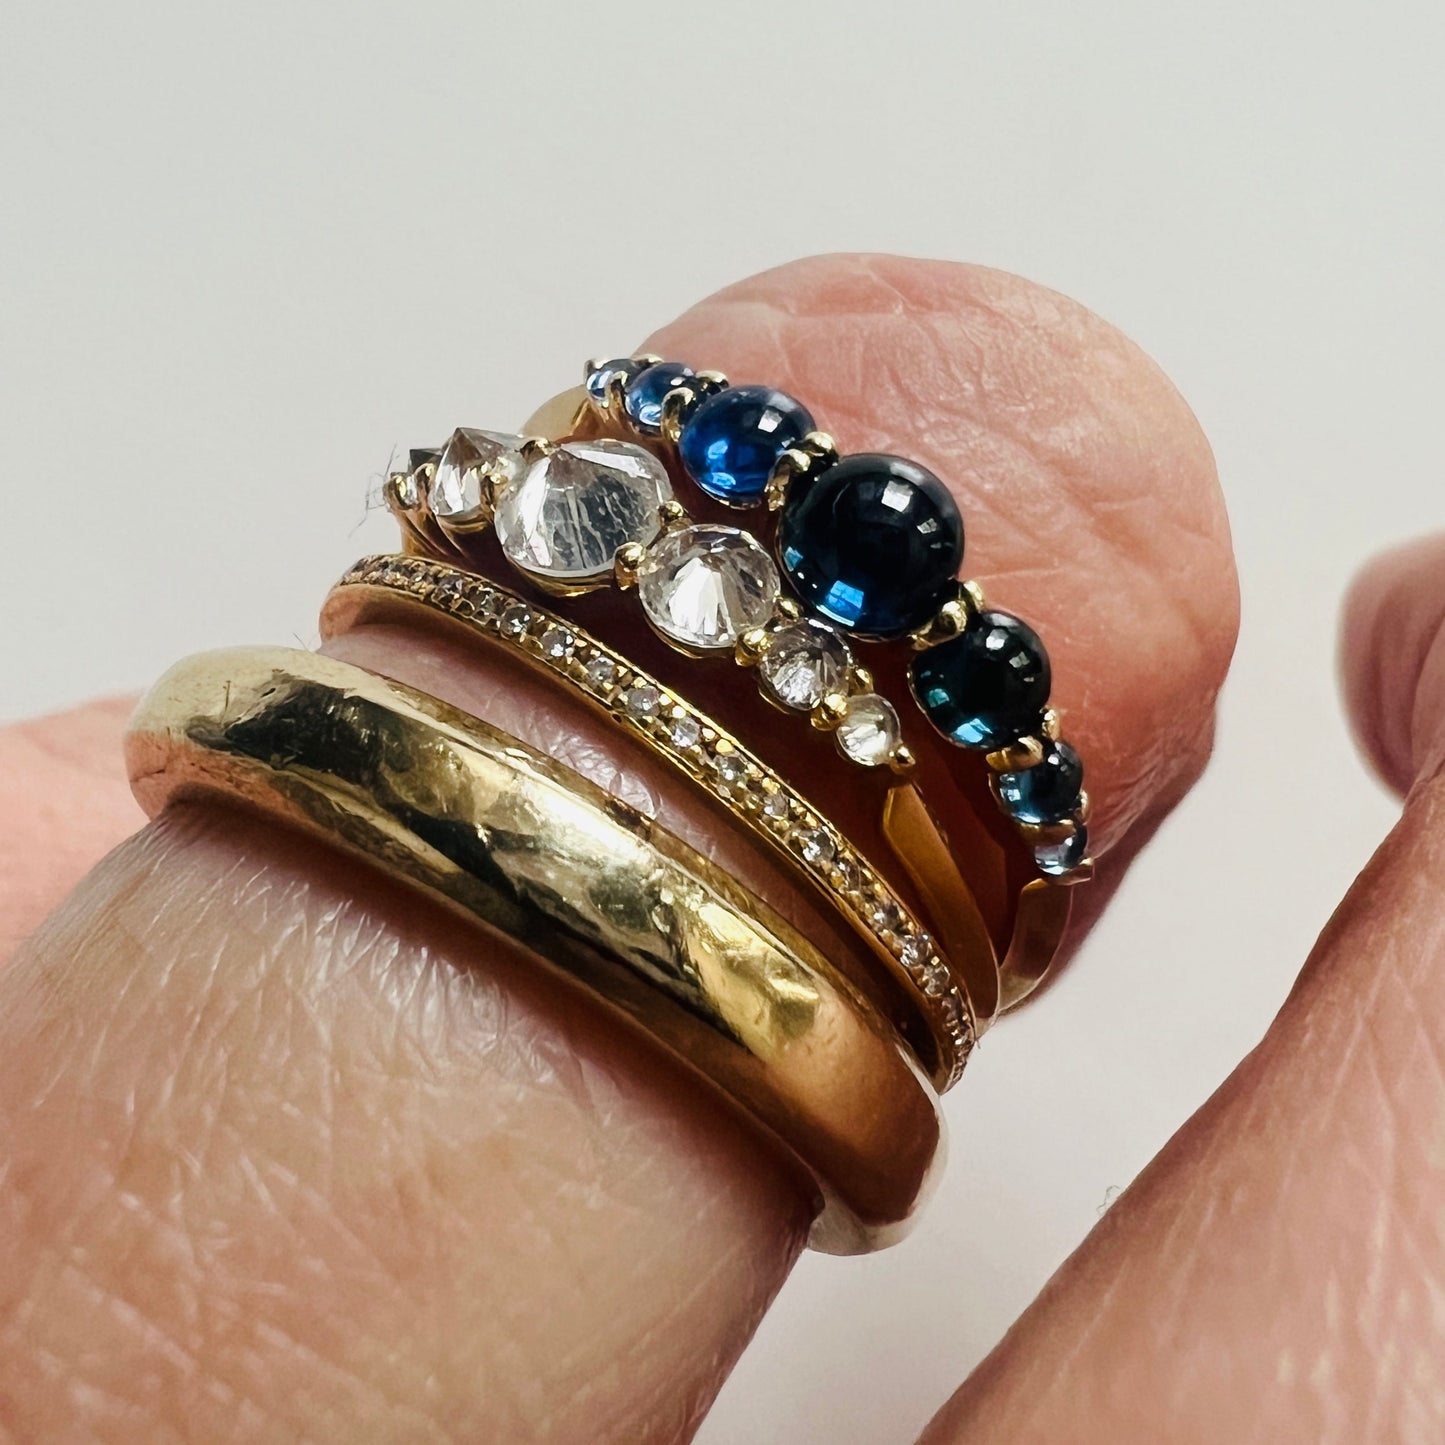 "Jelly Bean" Blue Sapphire Lina Ring -14k Gold